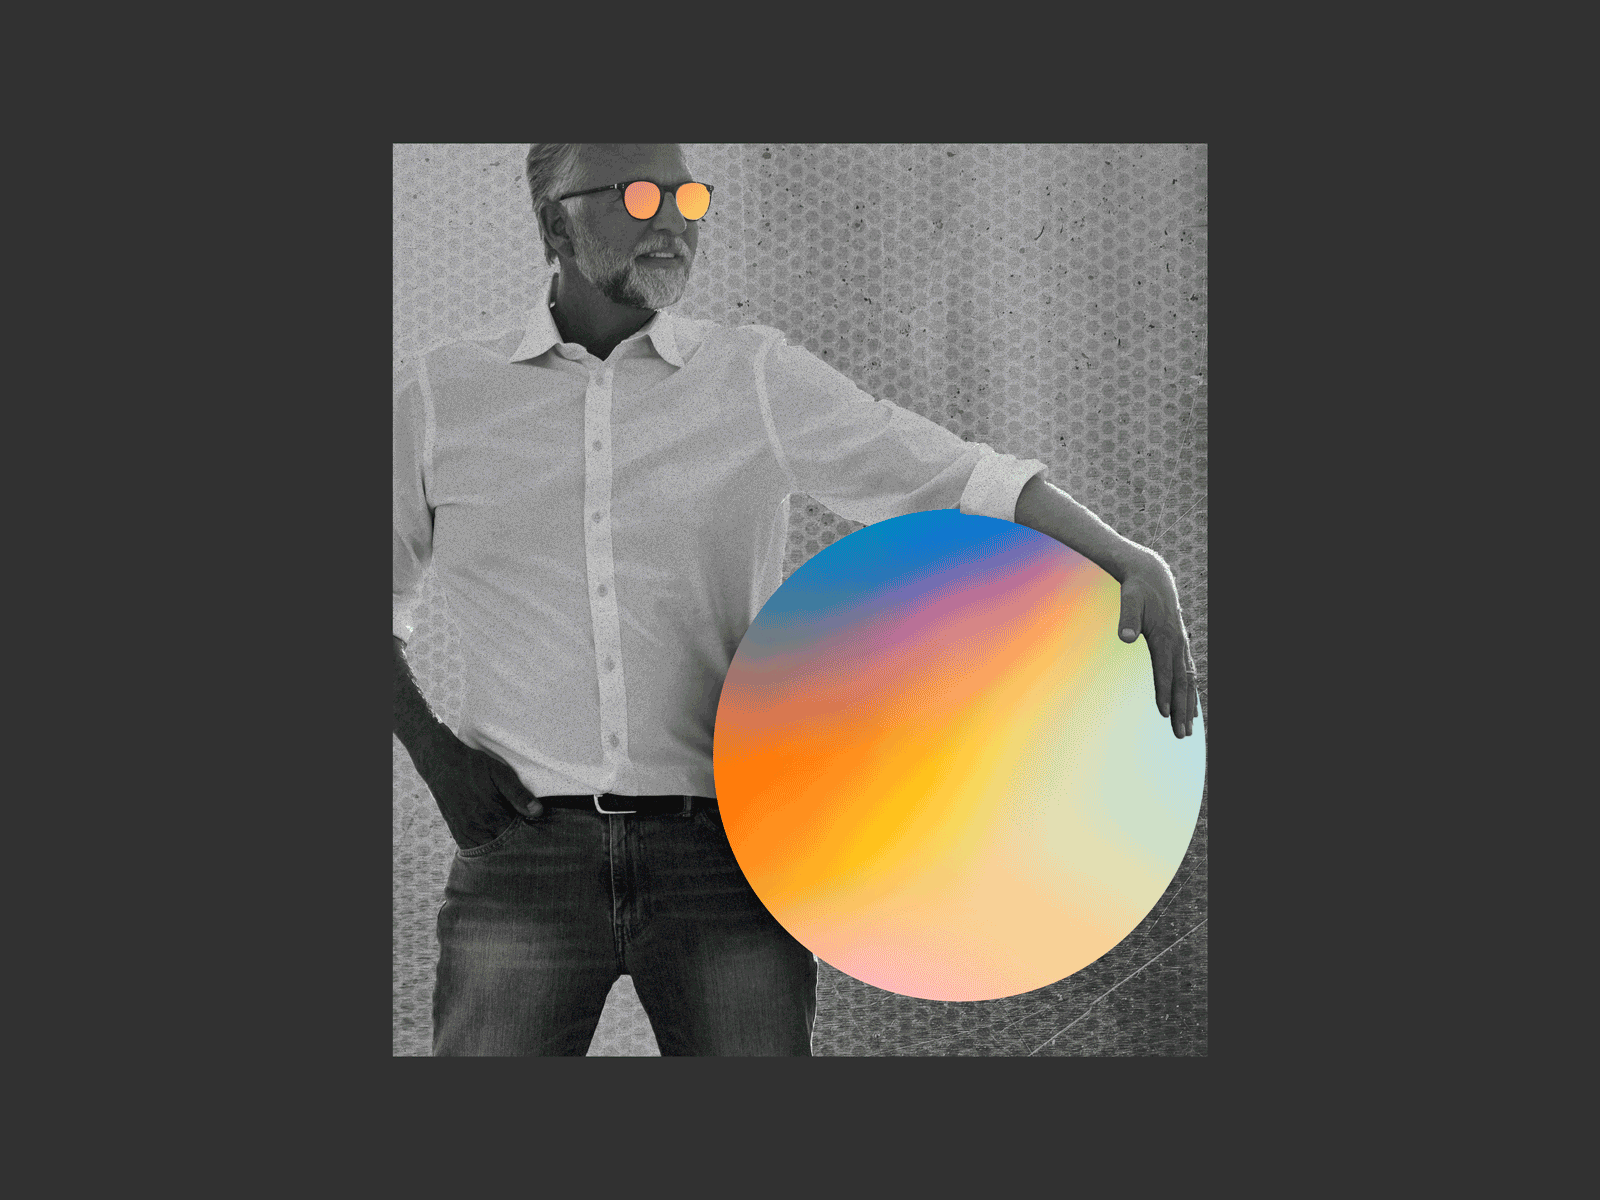 Man Holding Sphere ball calm collected cool edit gif gif animation globe gradient hold manipulation photo photography photoshop sphere sunglasses world